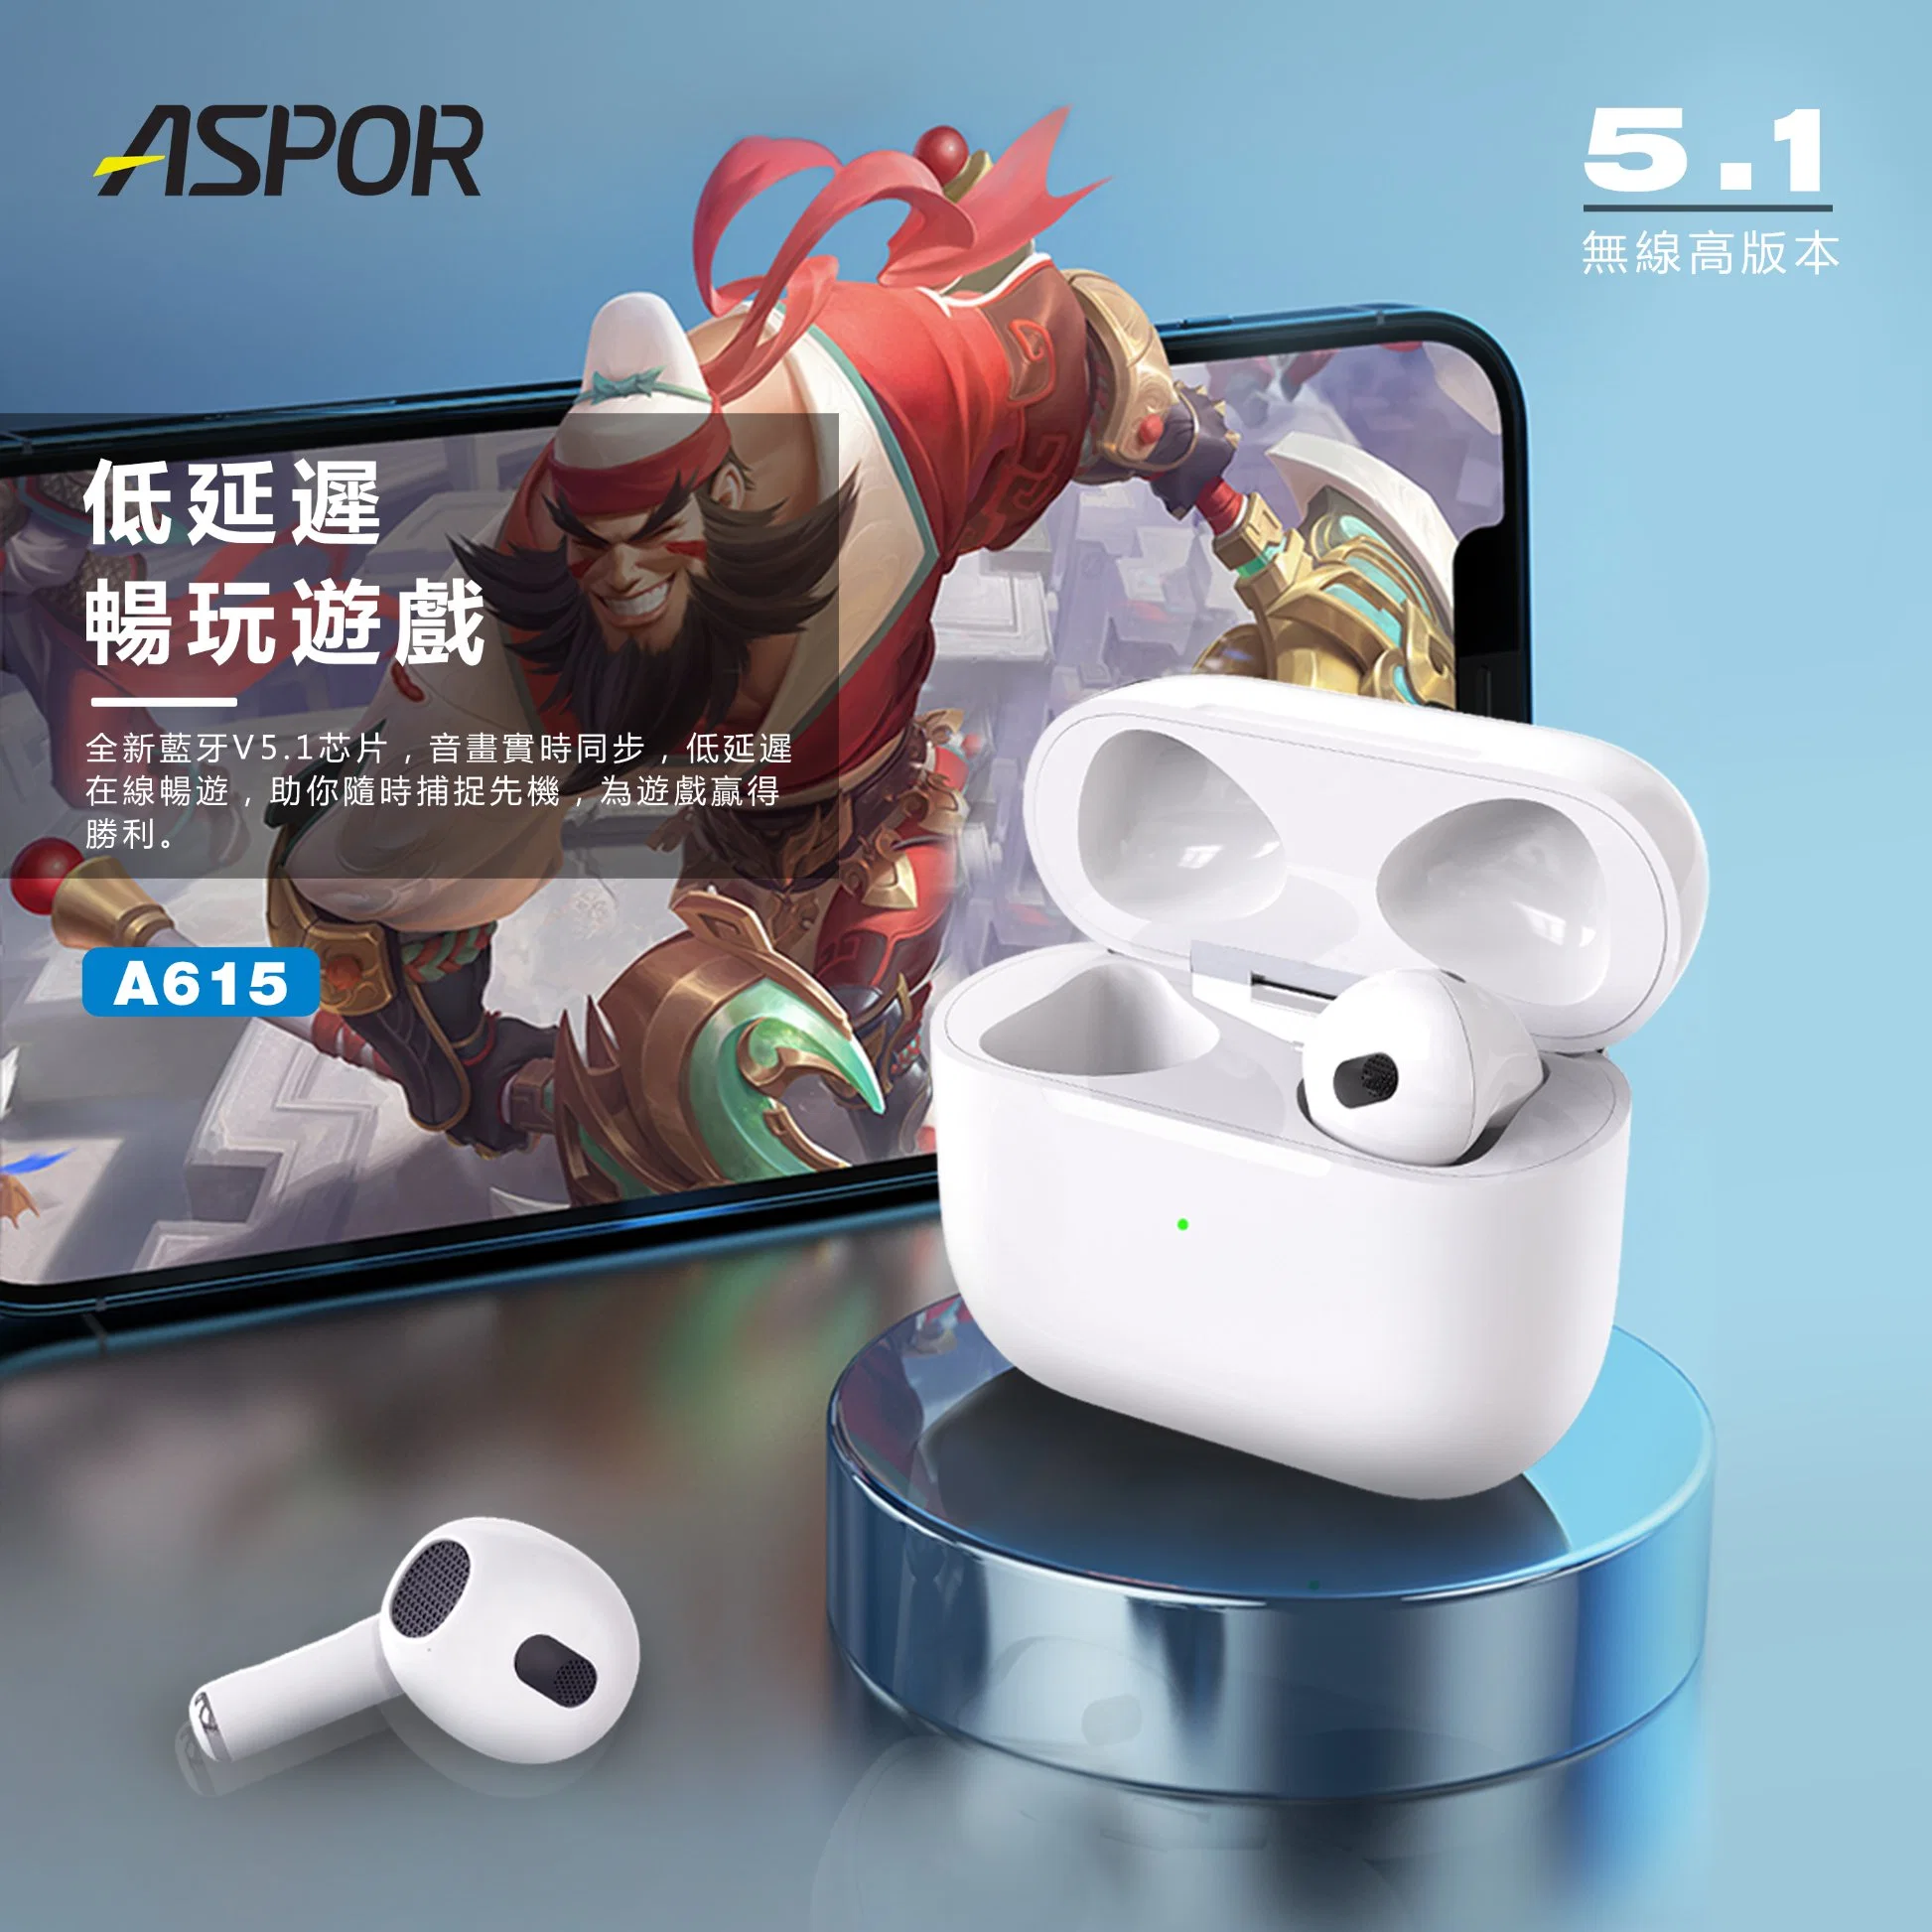 5.1 Bluetooth Earphone Support Wireless Charging Using Time 20 Hours Wireless Earbuds Headphone in China